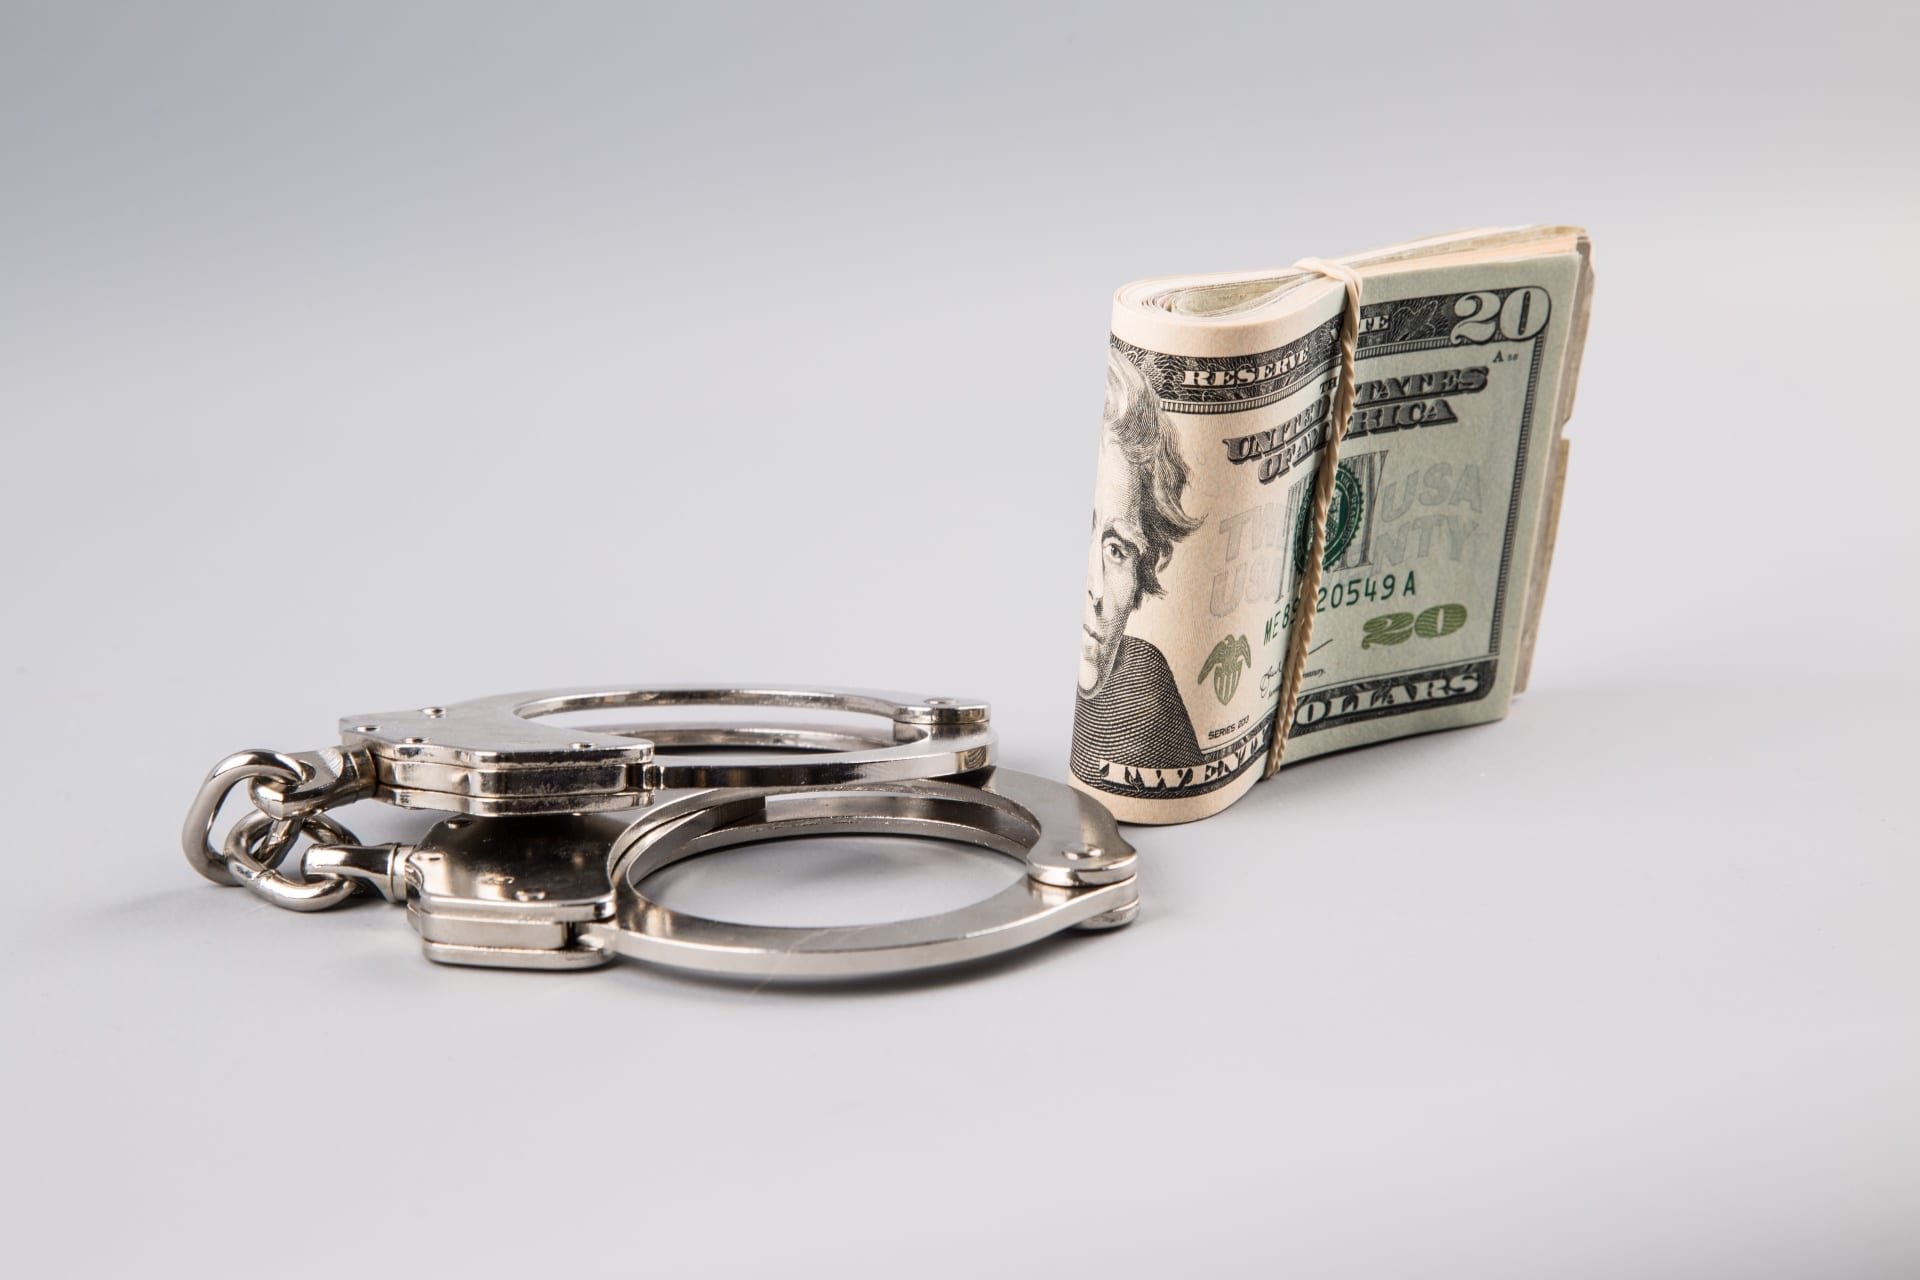 Handcuffs and money on grey background; image by George Hodan, via PublicDomainPictures.net, CC0.